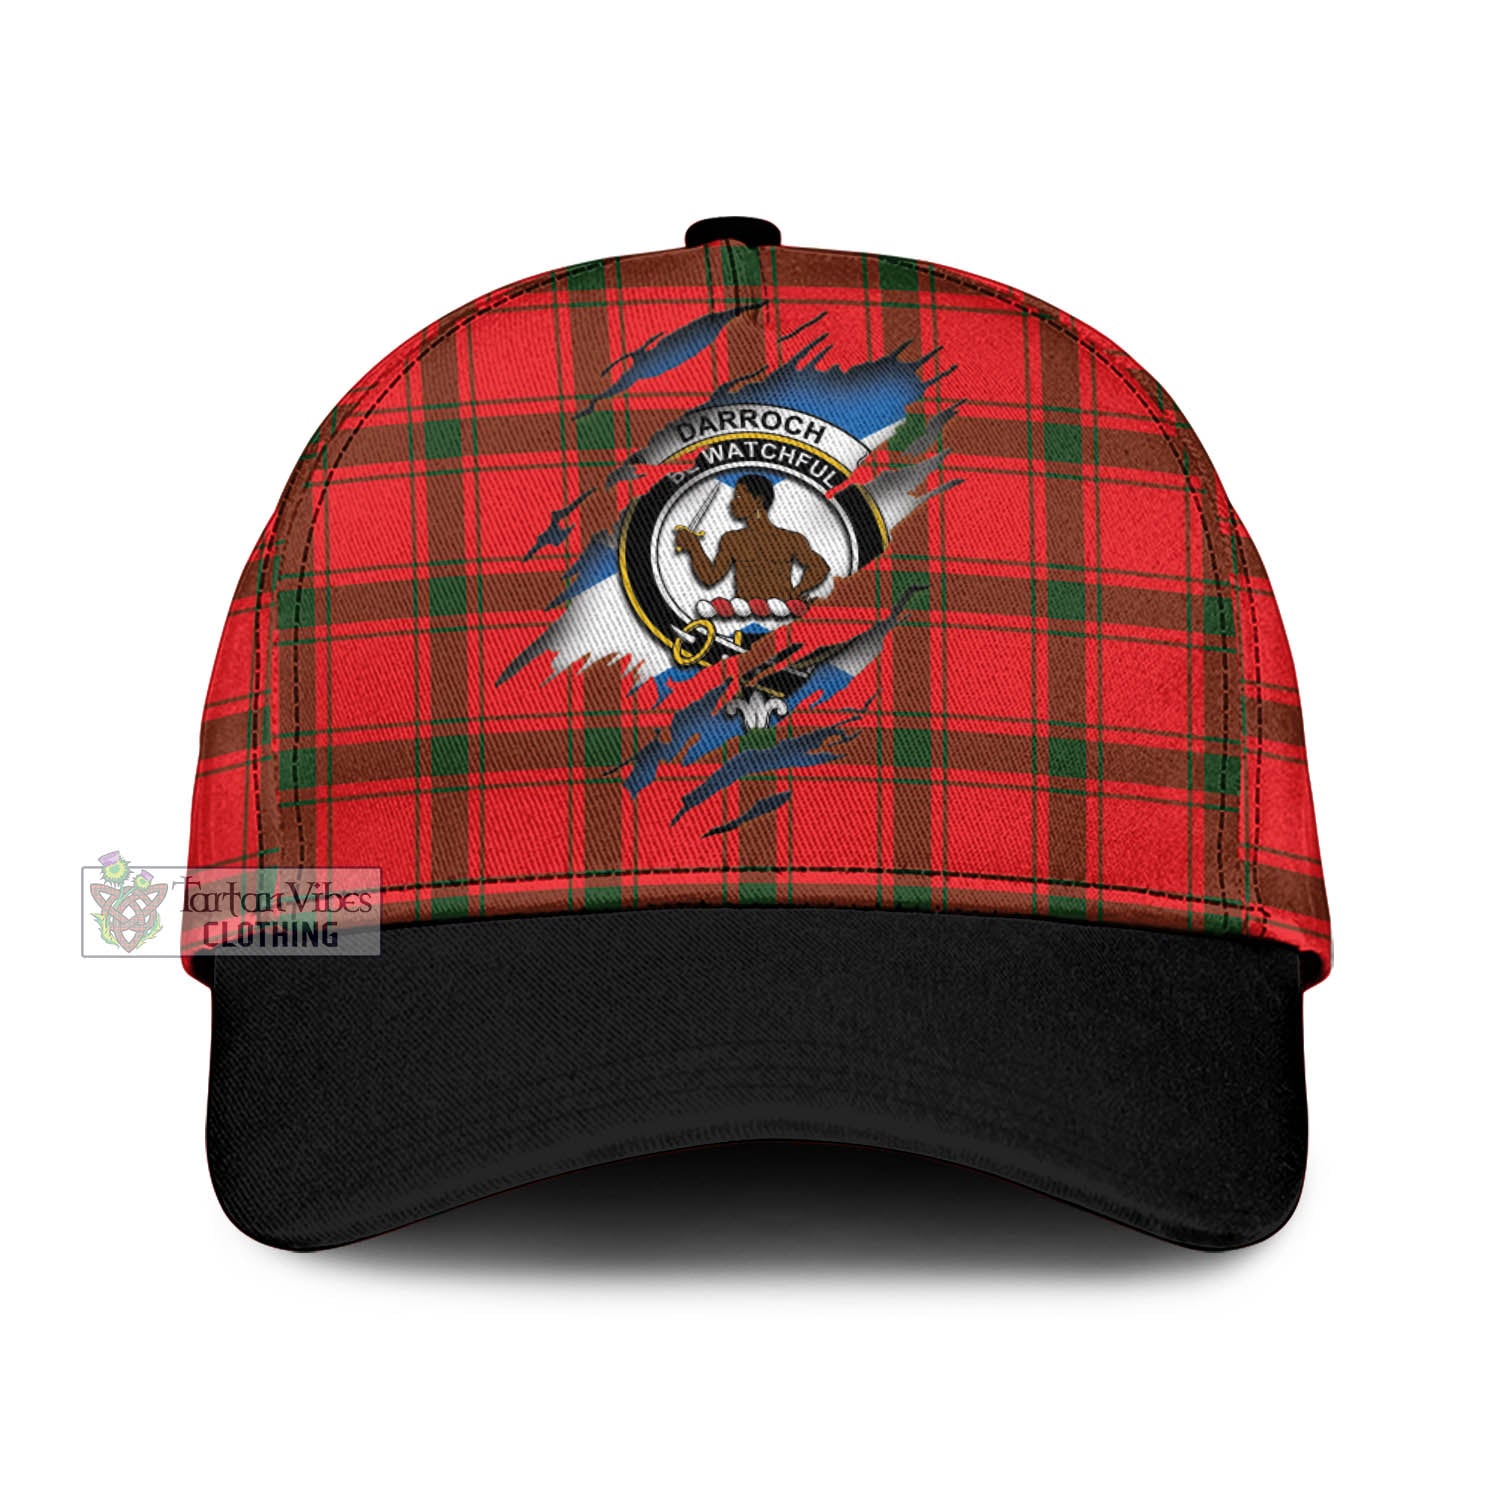 Tartan Vibes Clothing Darroch Tartan Classic Cap with Family Crest In Me Style